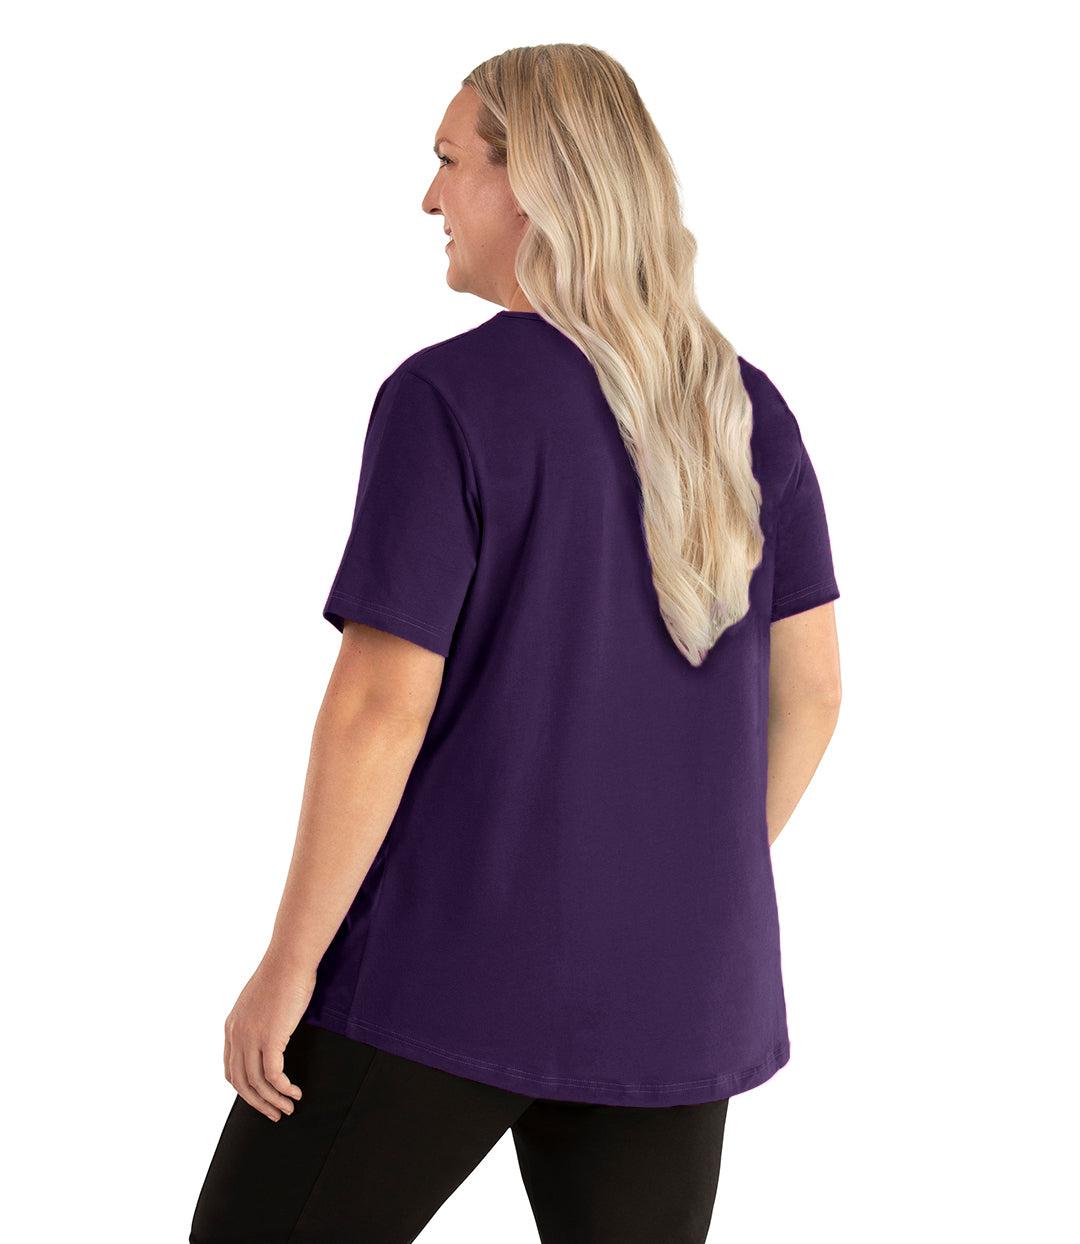  Plus size woman, facing back left, wearing JunoActive plus size Stretch Naturals Lite Short Sleeve Scoop Neck Top in the color deep plum. She is wearing JunoActive Plus Size Leggings in the color black.